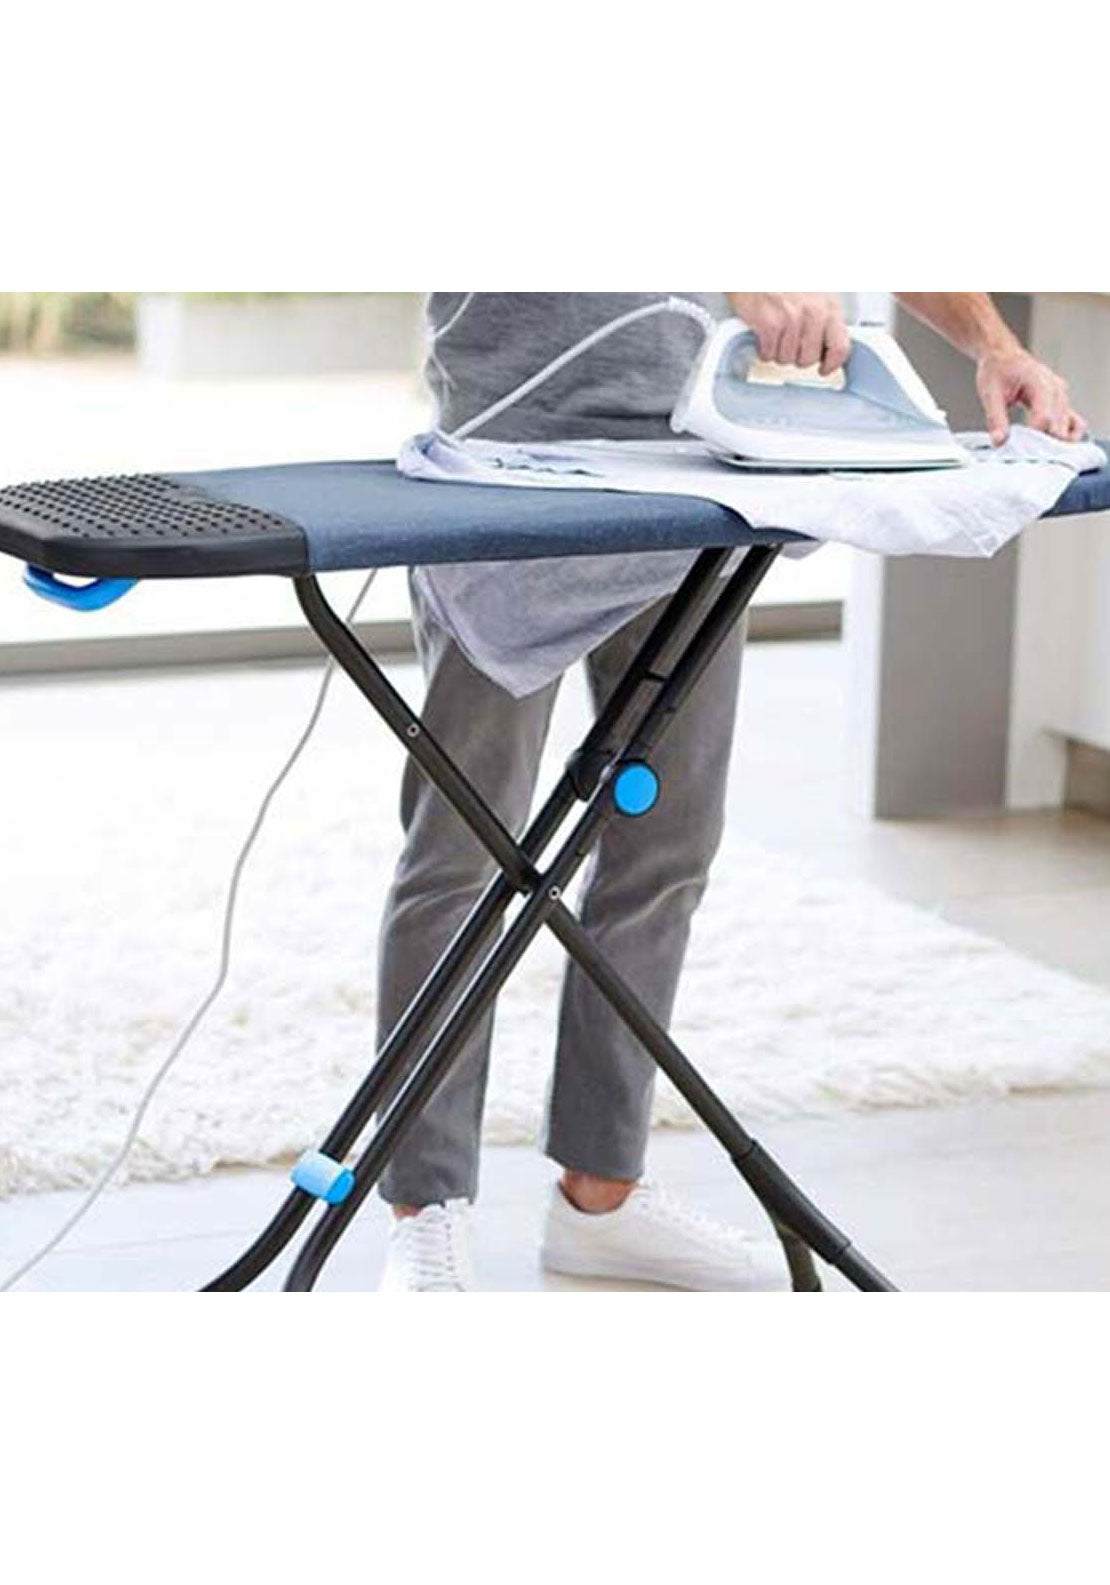 Joseph Joseph Glide Plus Easy Store Ironing Board With Cover | 50006JJ 3 Shaws Department Stores